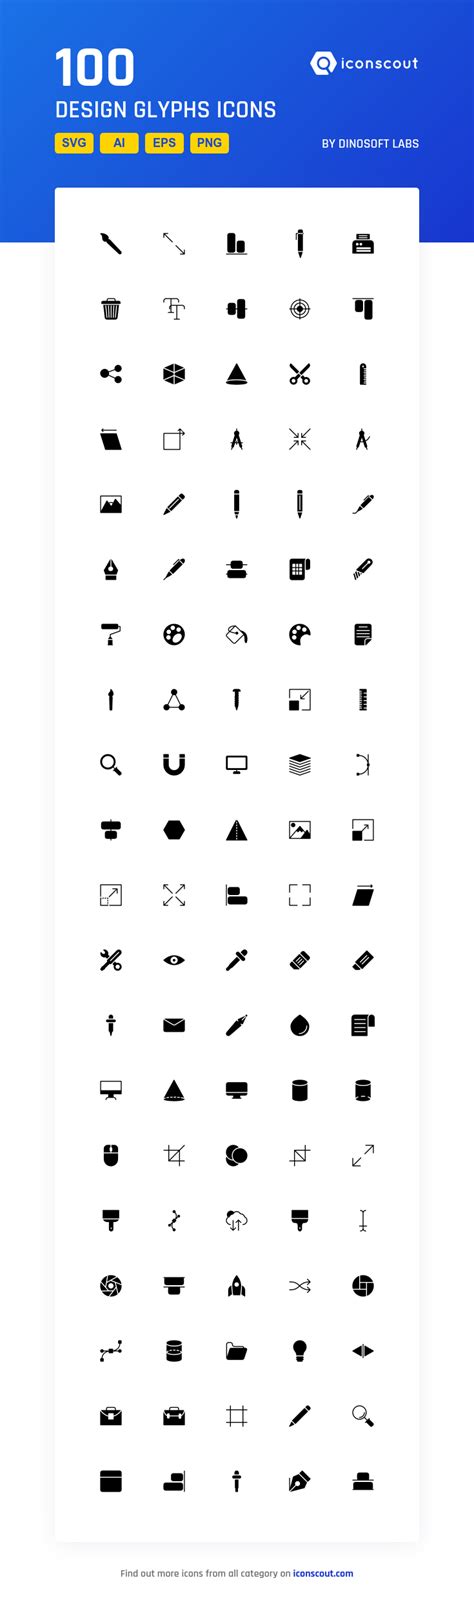 Download Design Glyphs Icon Pack Available In Svg Png And Icon Fonts